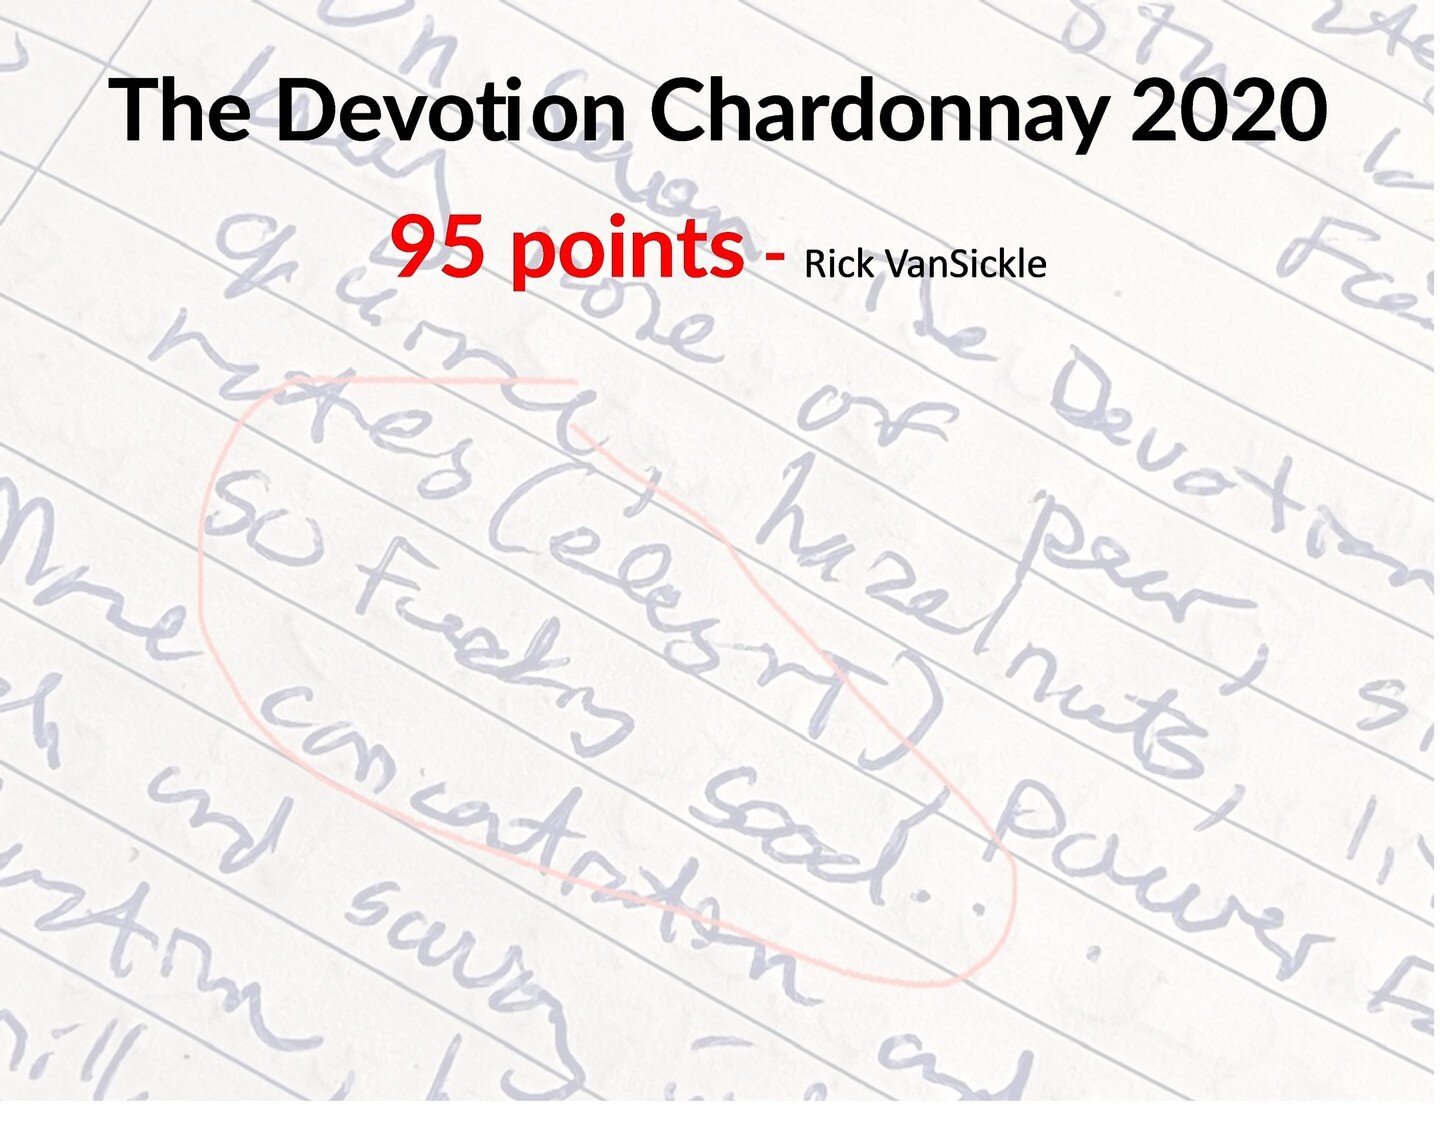 ⚡ We are trying to keep this family friendly, but we don&rsquo;t want to lose the spirit of Rick VanSickle&rsquo;s reaction to our 2020 Devotion Chardonnay &ndash; as written and circled in his tasting notepad! ⚡⁠
⁠
This year&rsquo;s annual release f